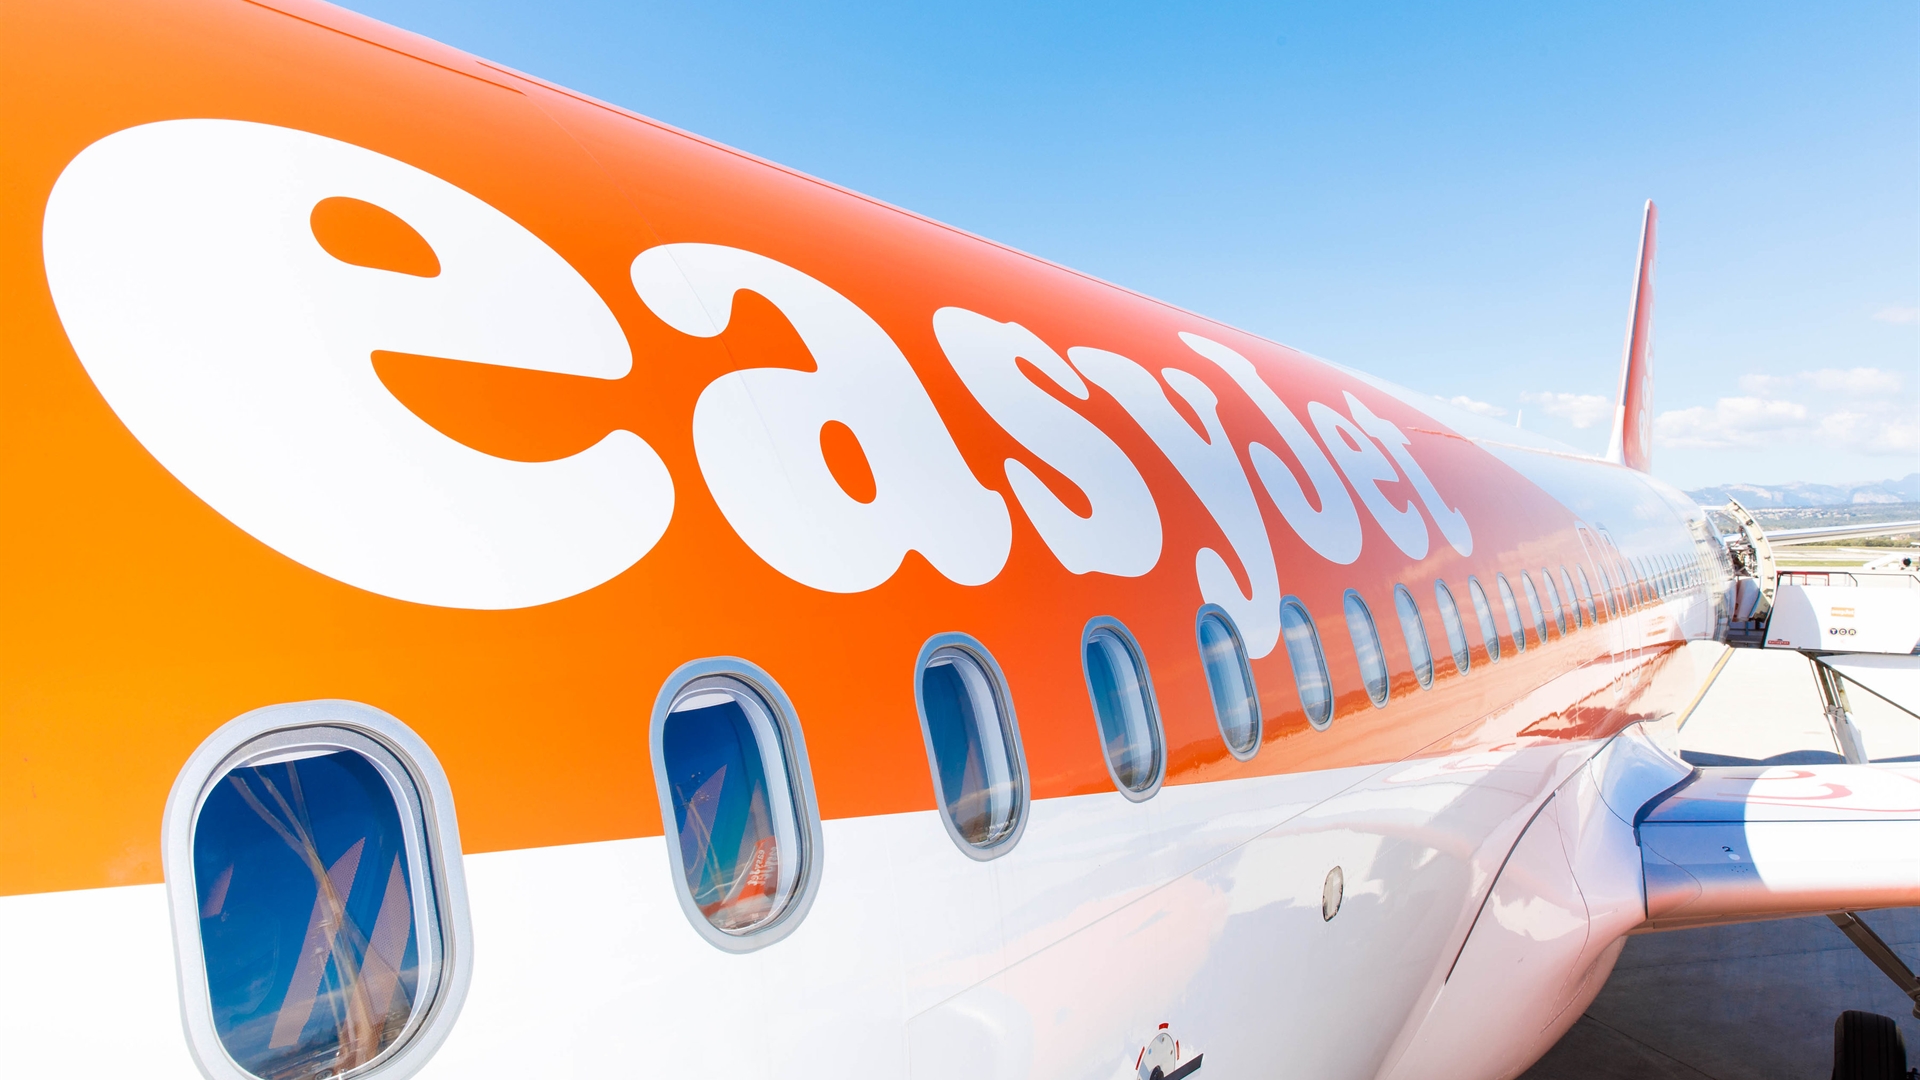 easyJet launches two new routes from the UK